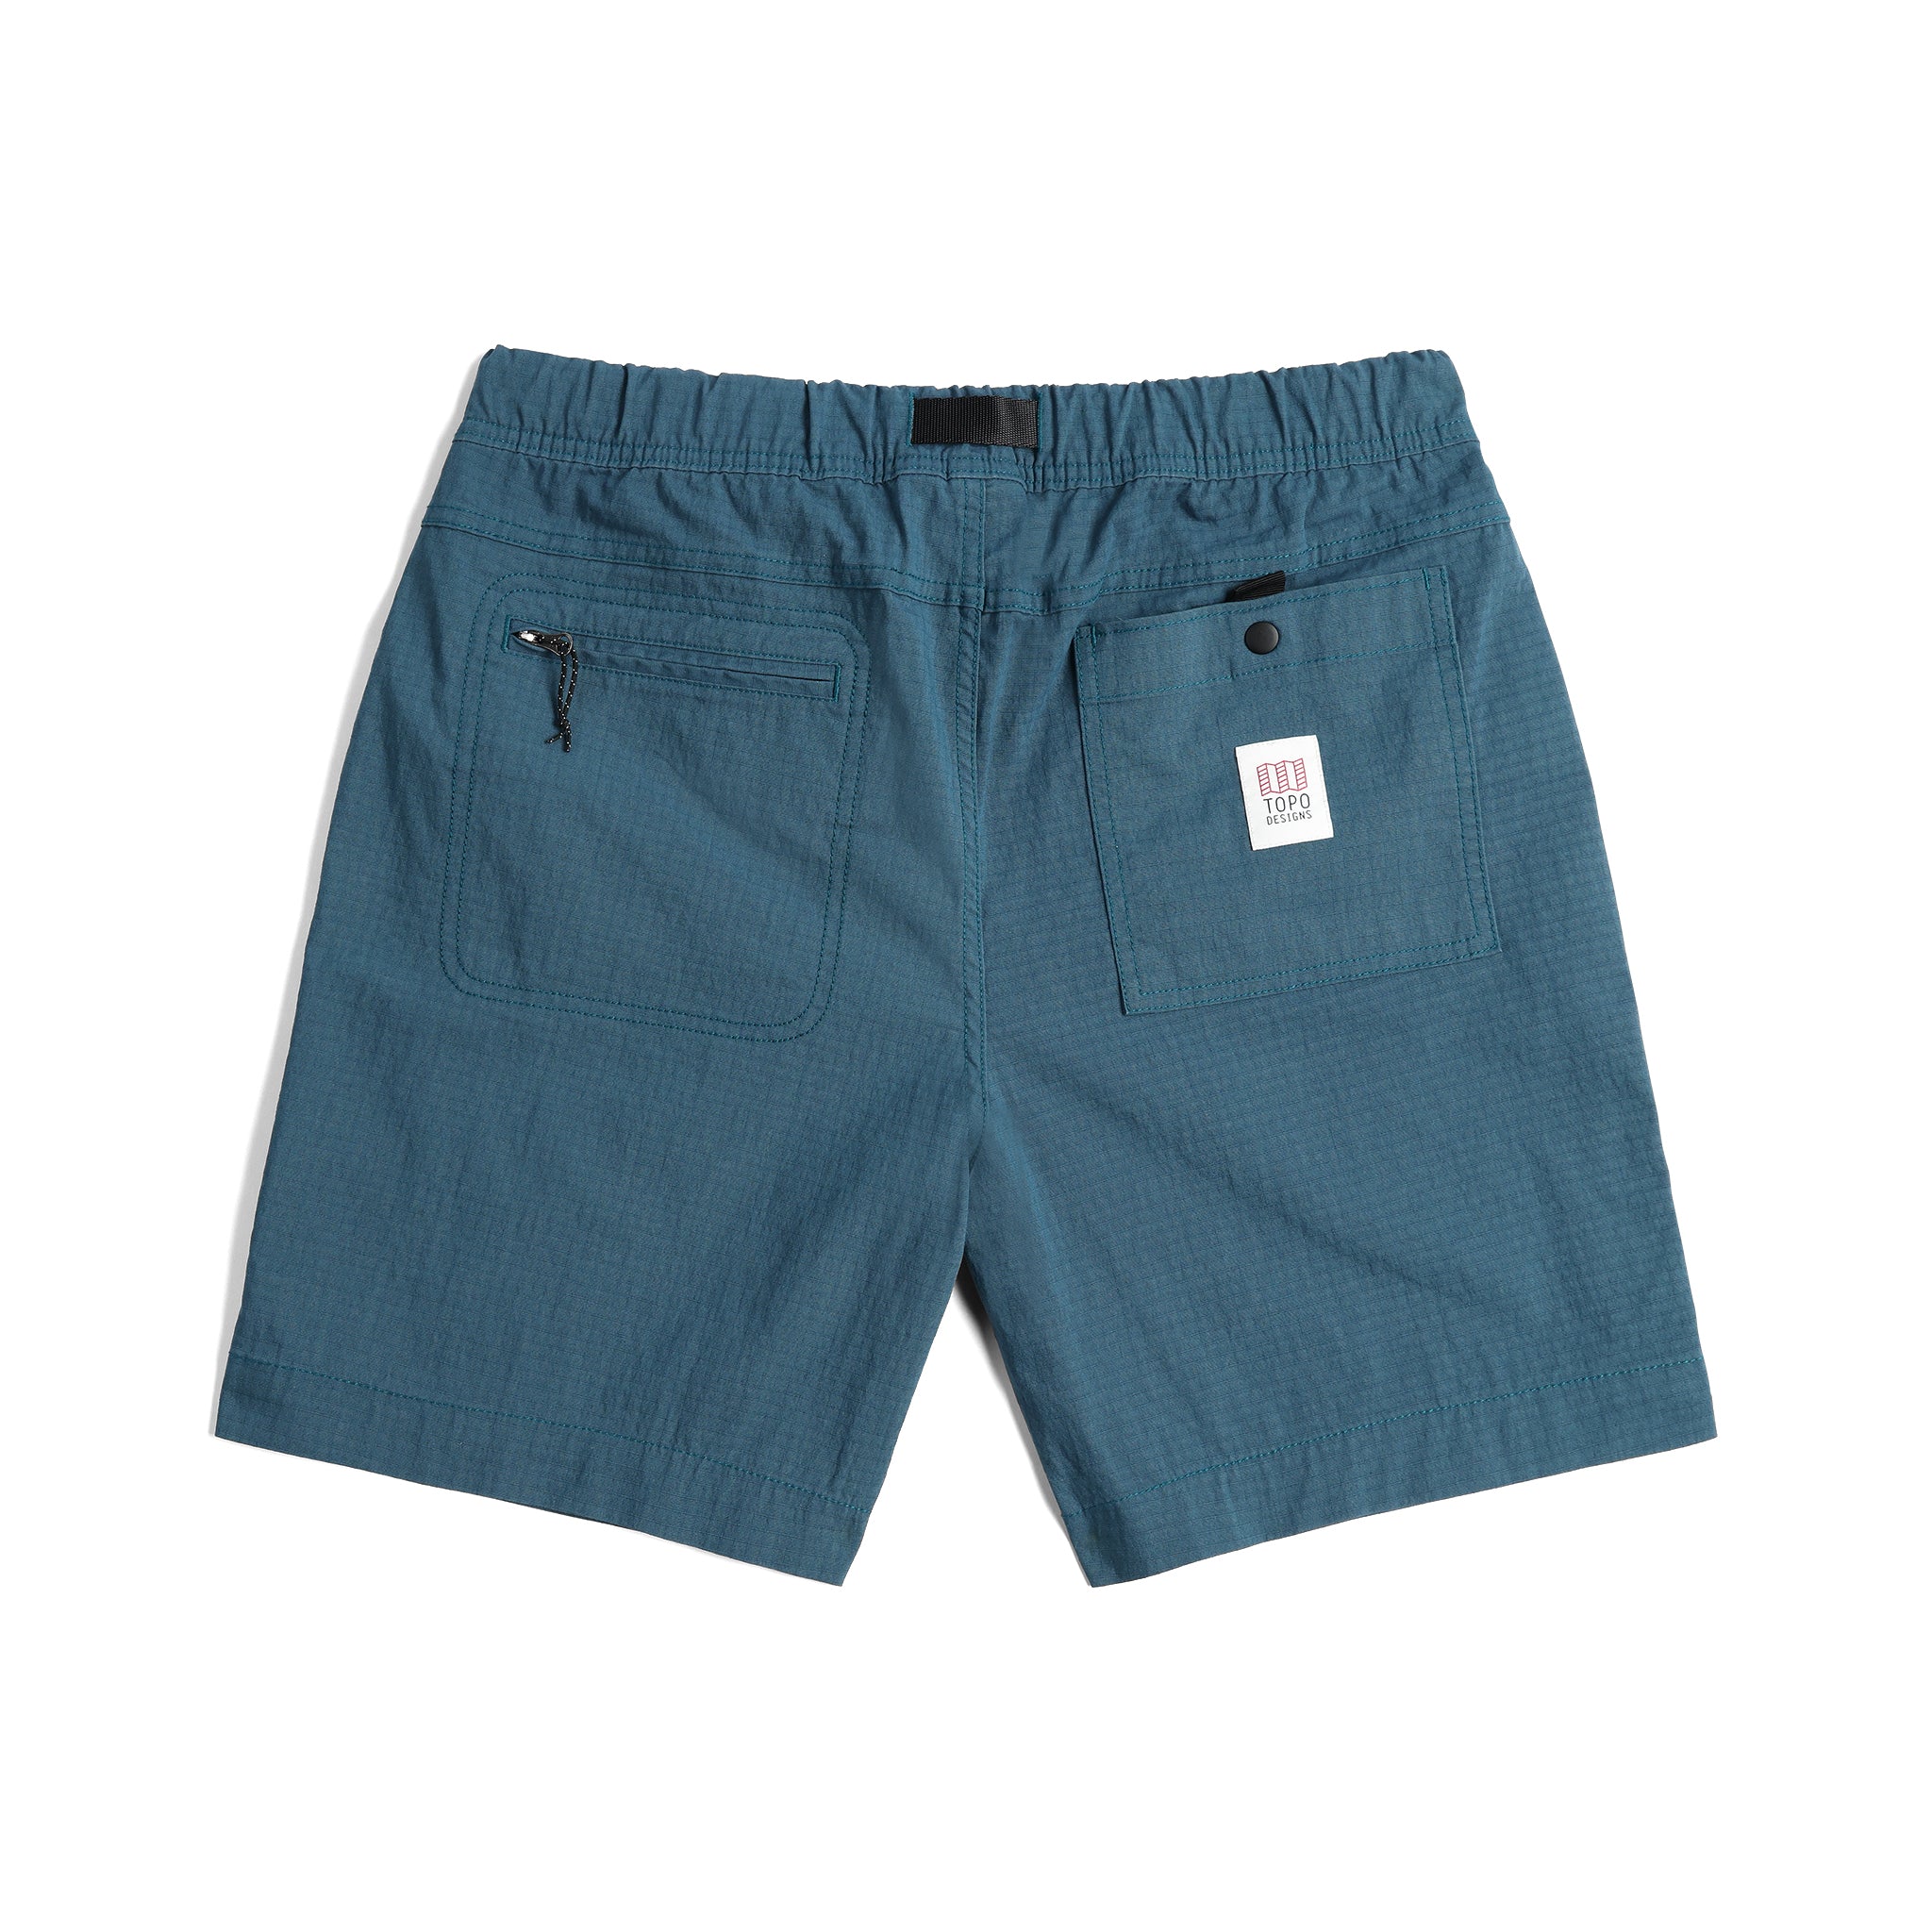 Back View of Topo Designs Mountain Short Ripstop - Men's in "Pond Blue"